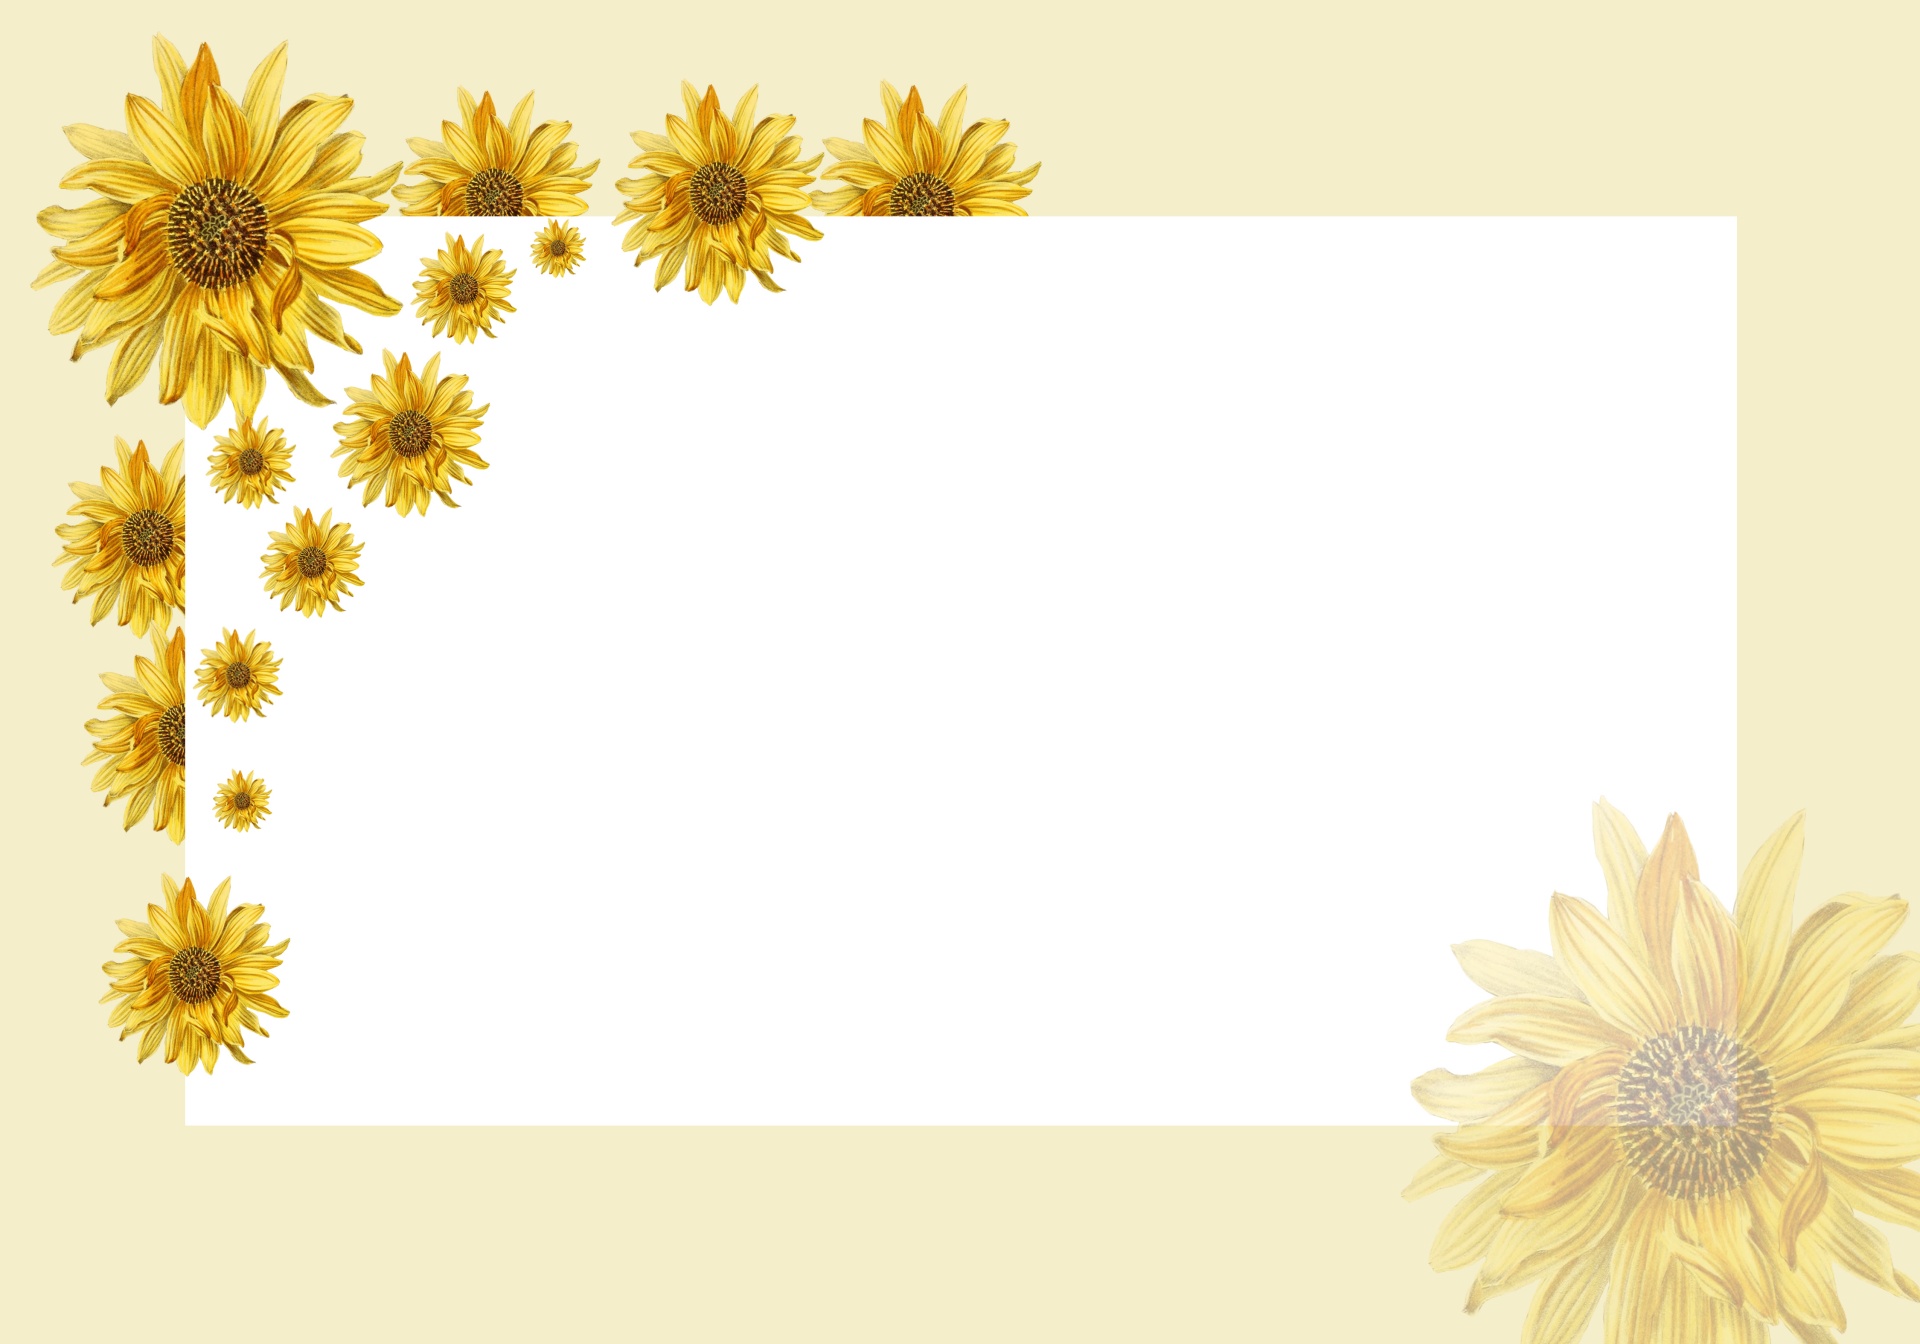 sunflowers-card-invitation-blank-free-stock-photo-public-domain-pictures